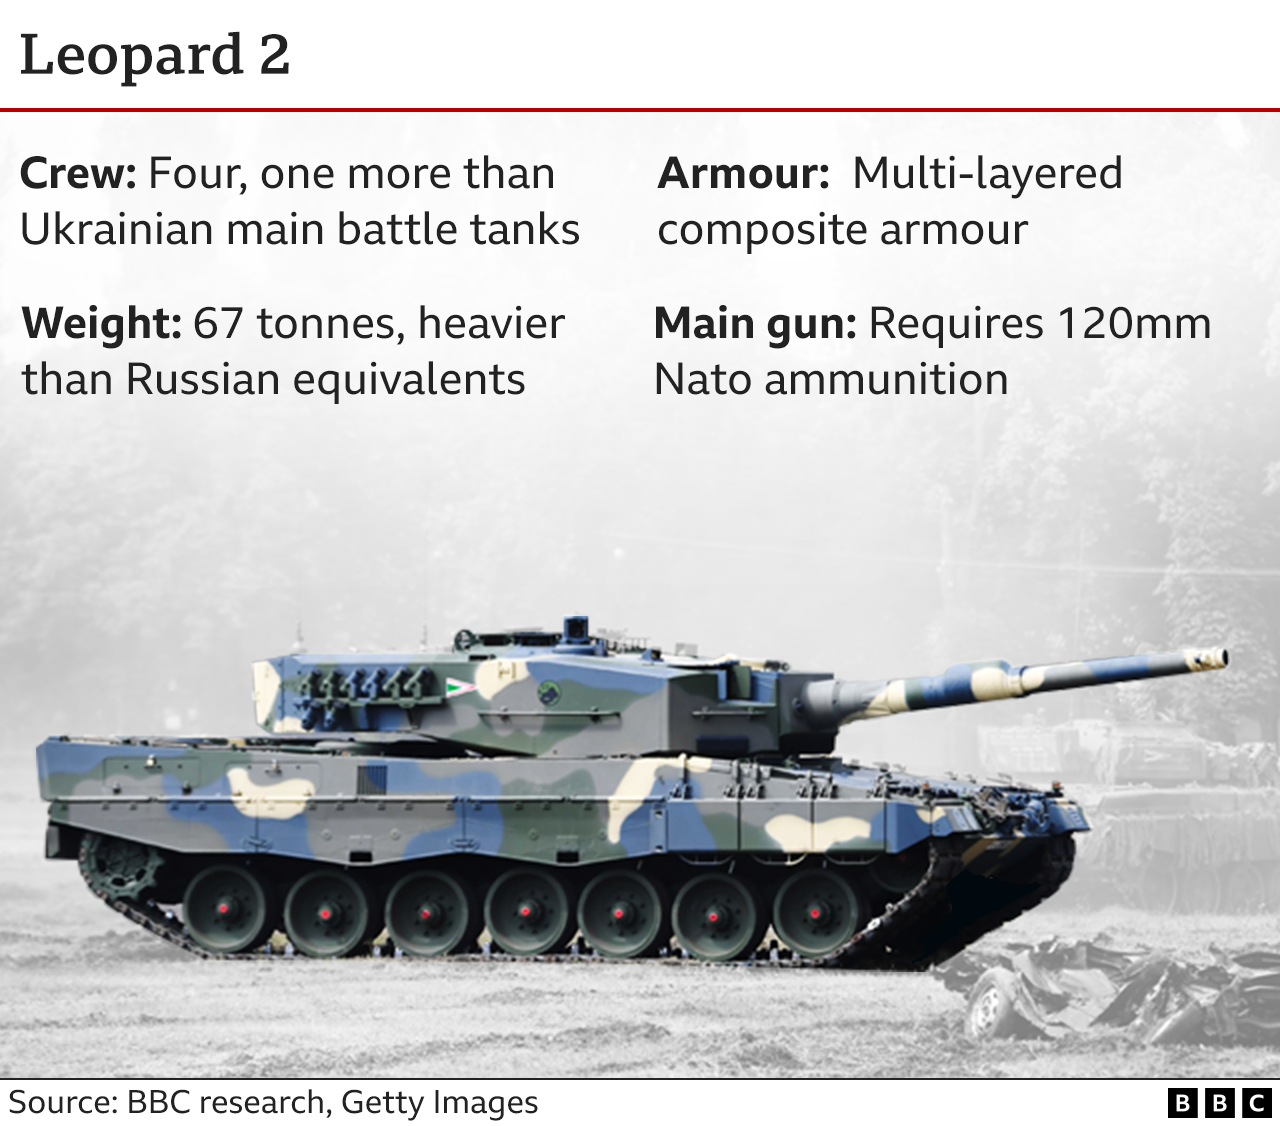 Graphic showing characteristics of the German-made Leopard 2 tank. The Leopard 2 is heavier and better armoured than Russian or Soviet-made tanks and uses Nato-standard ammunition.